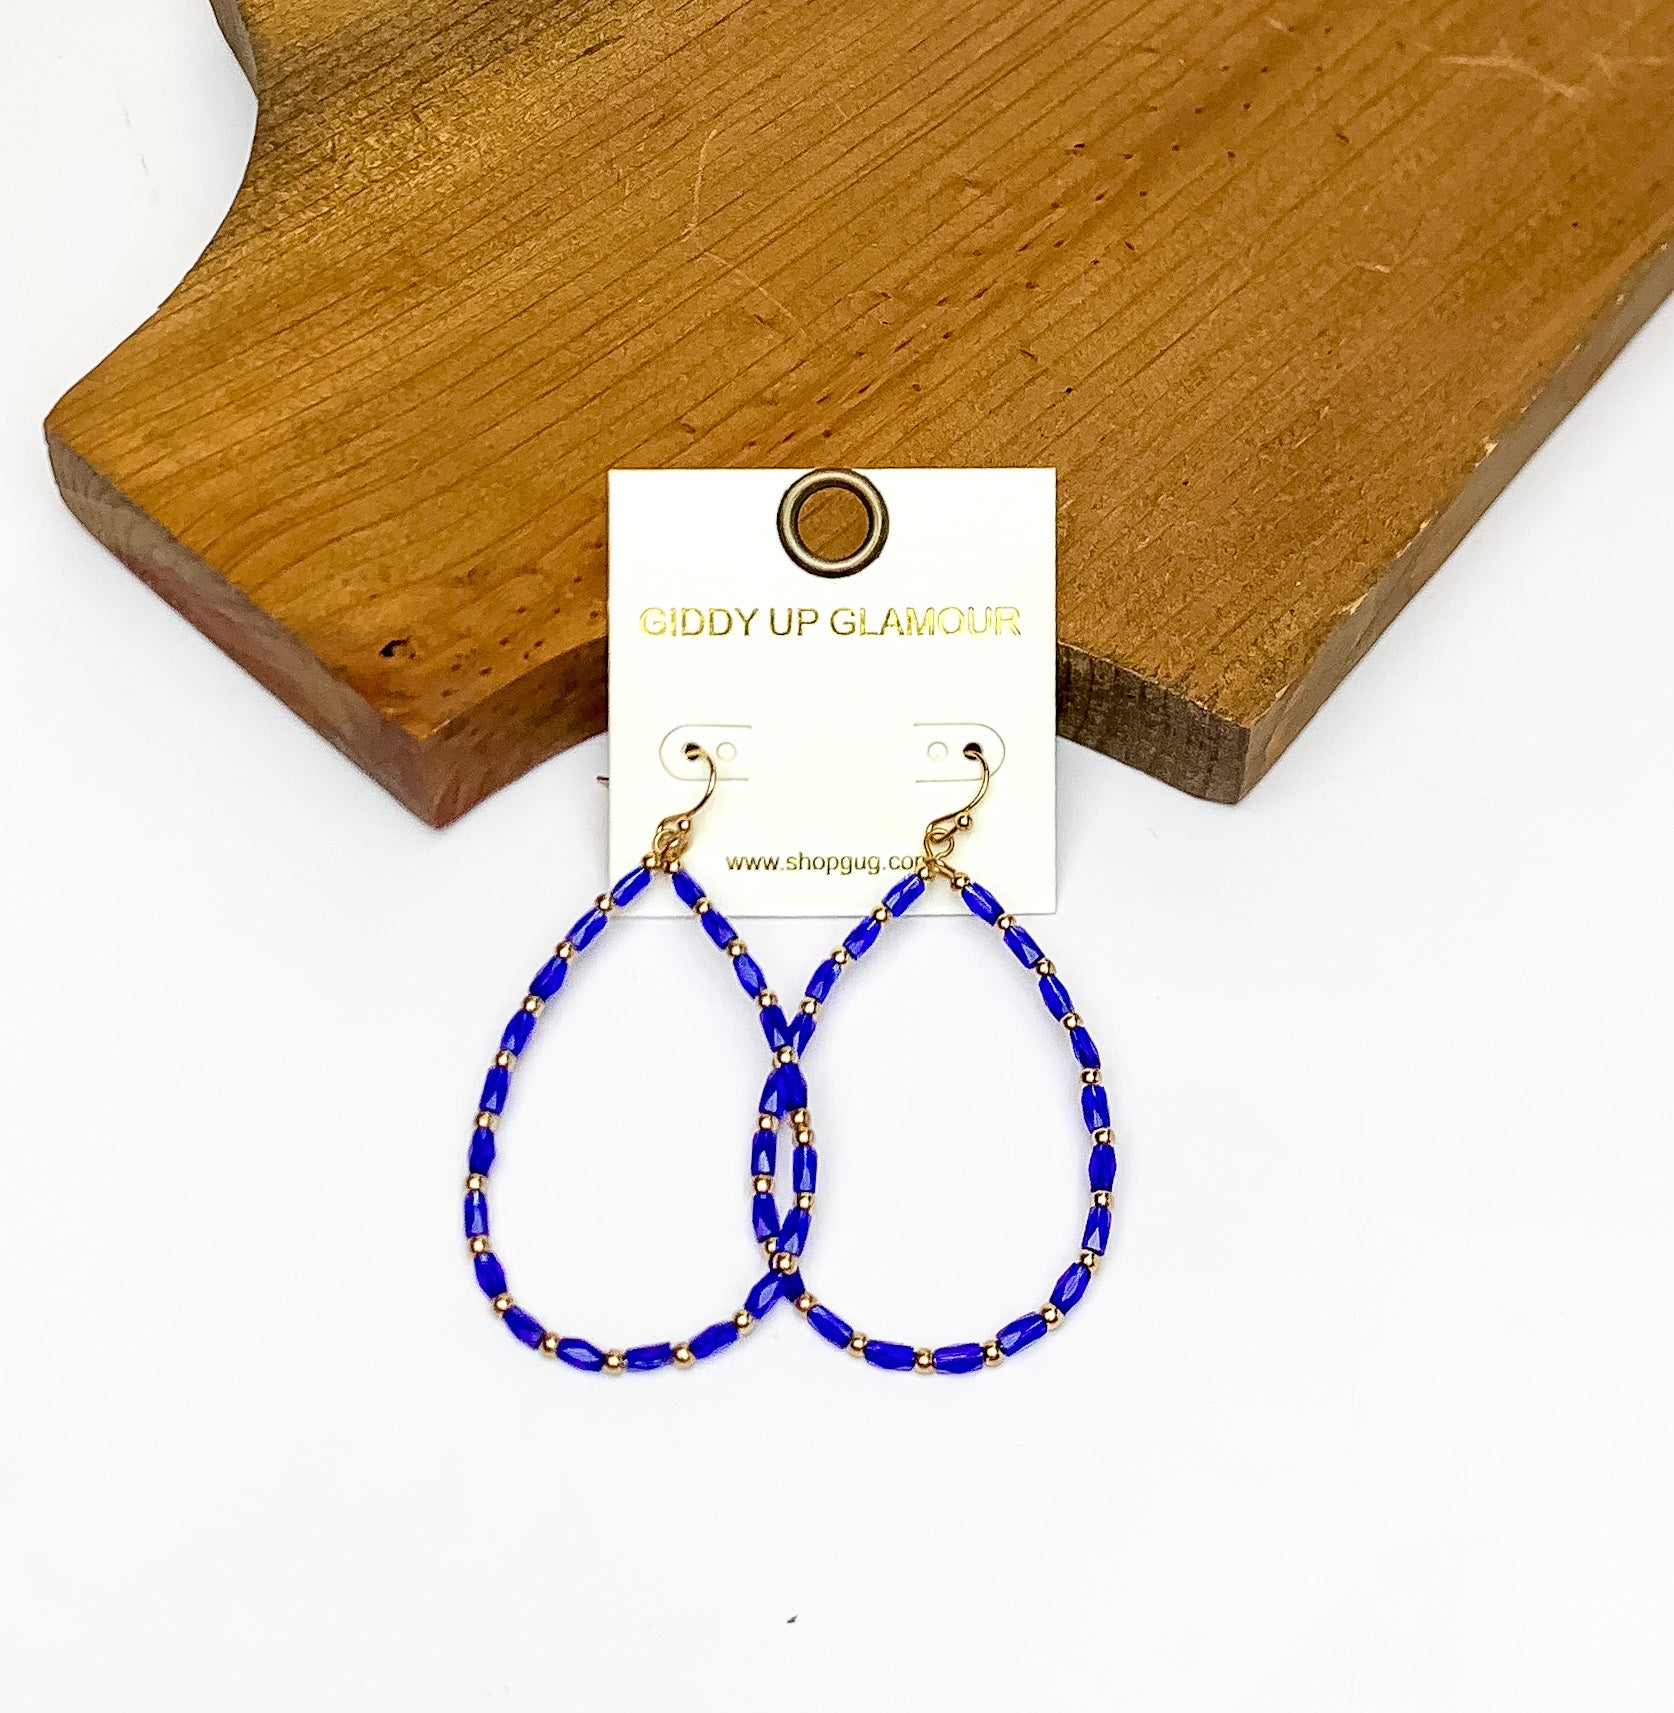 Royal Blue Beaded Open Drop Earrings with Gold Tone Spacers. Pictured on a white background with the earrings against a wood piece.